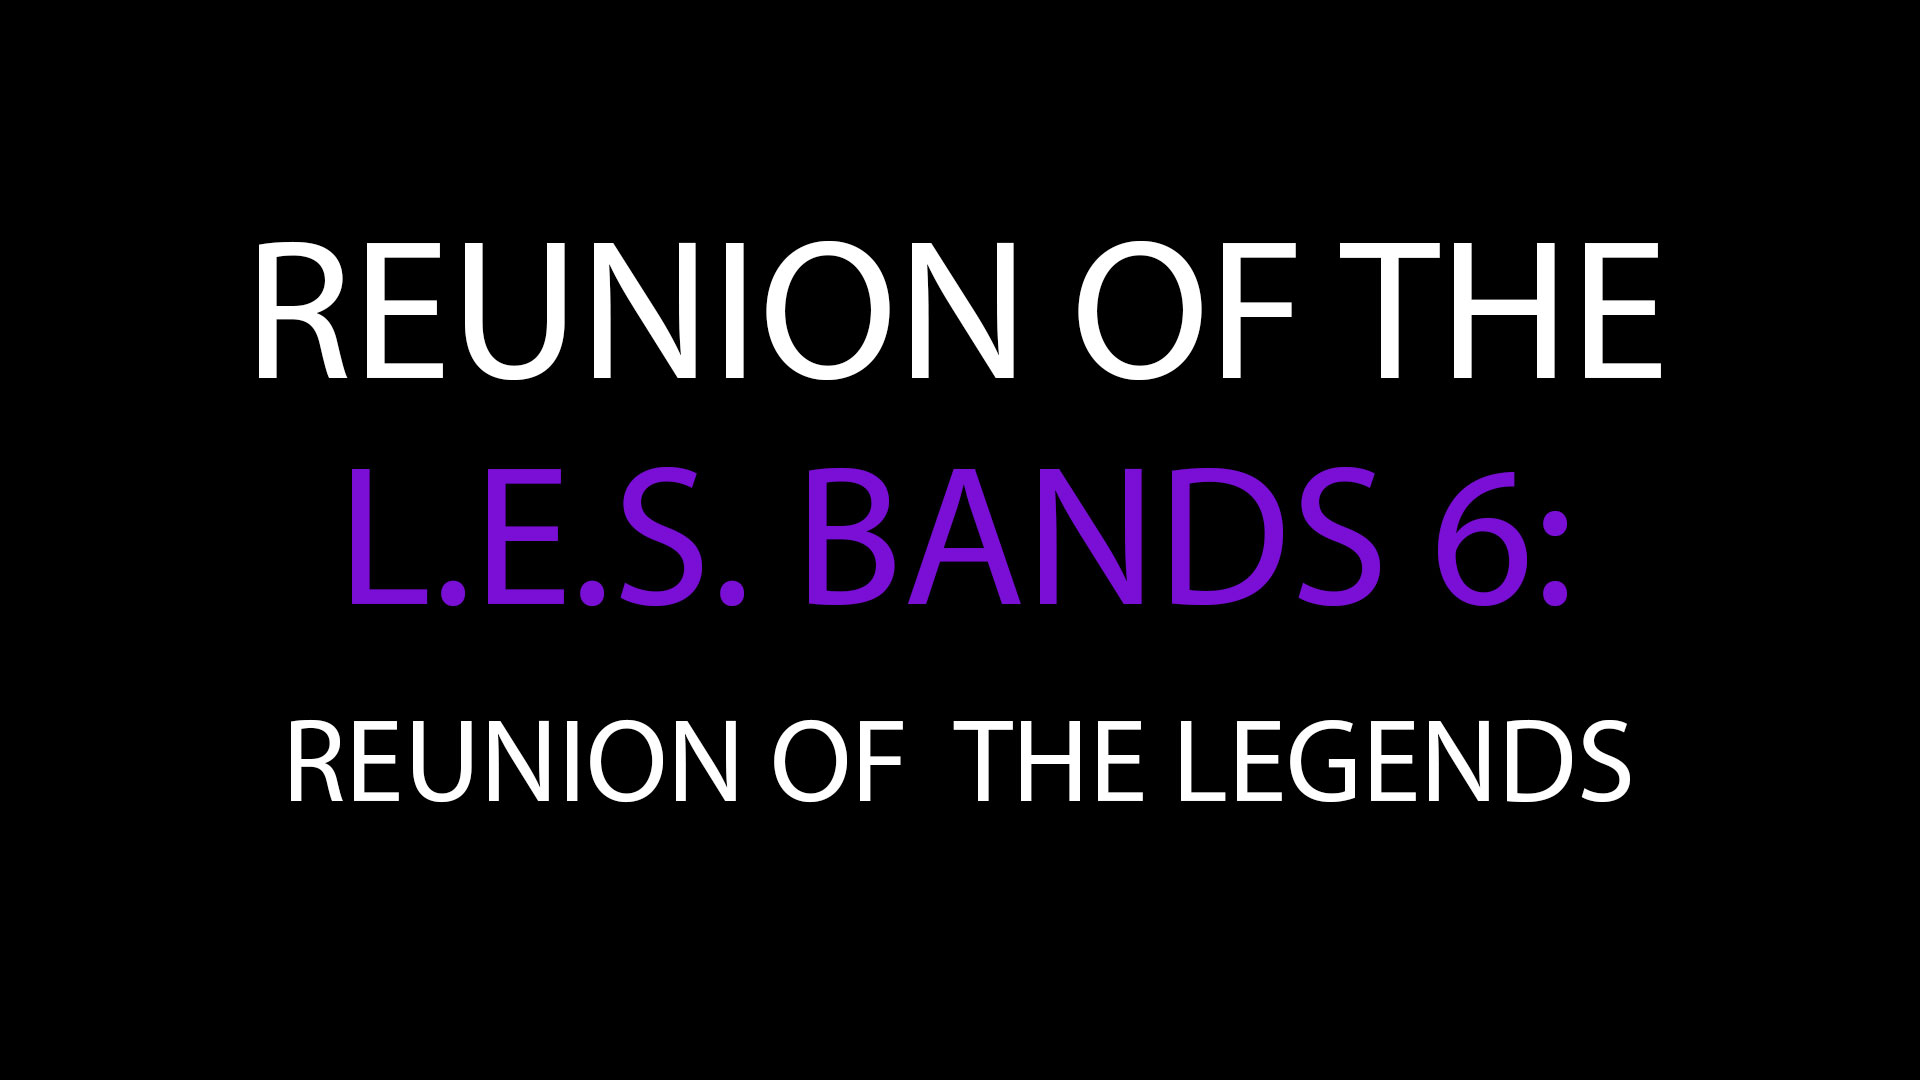 Reunion of the L.E.S Bands 6: 2013: 2018 - Promo